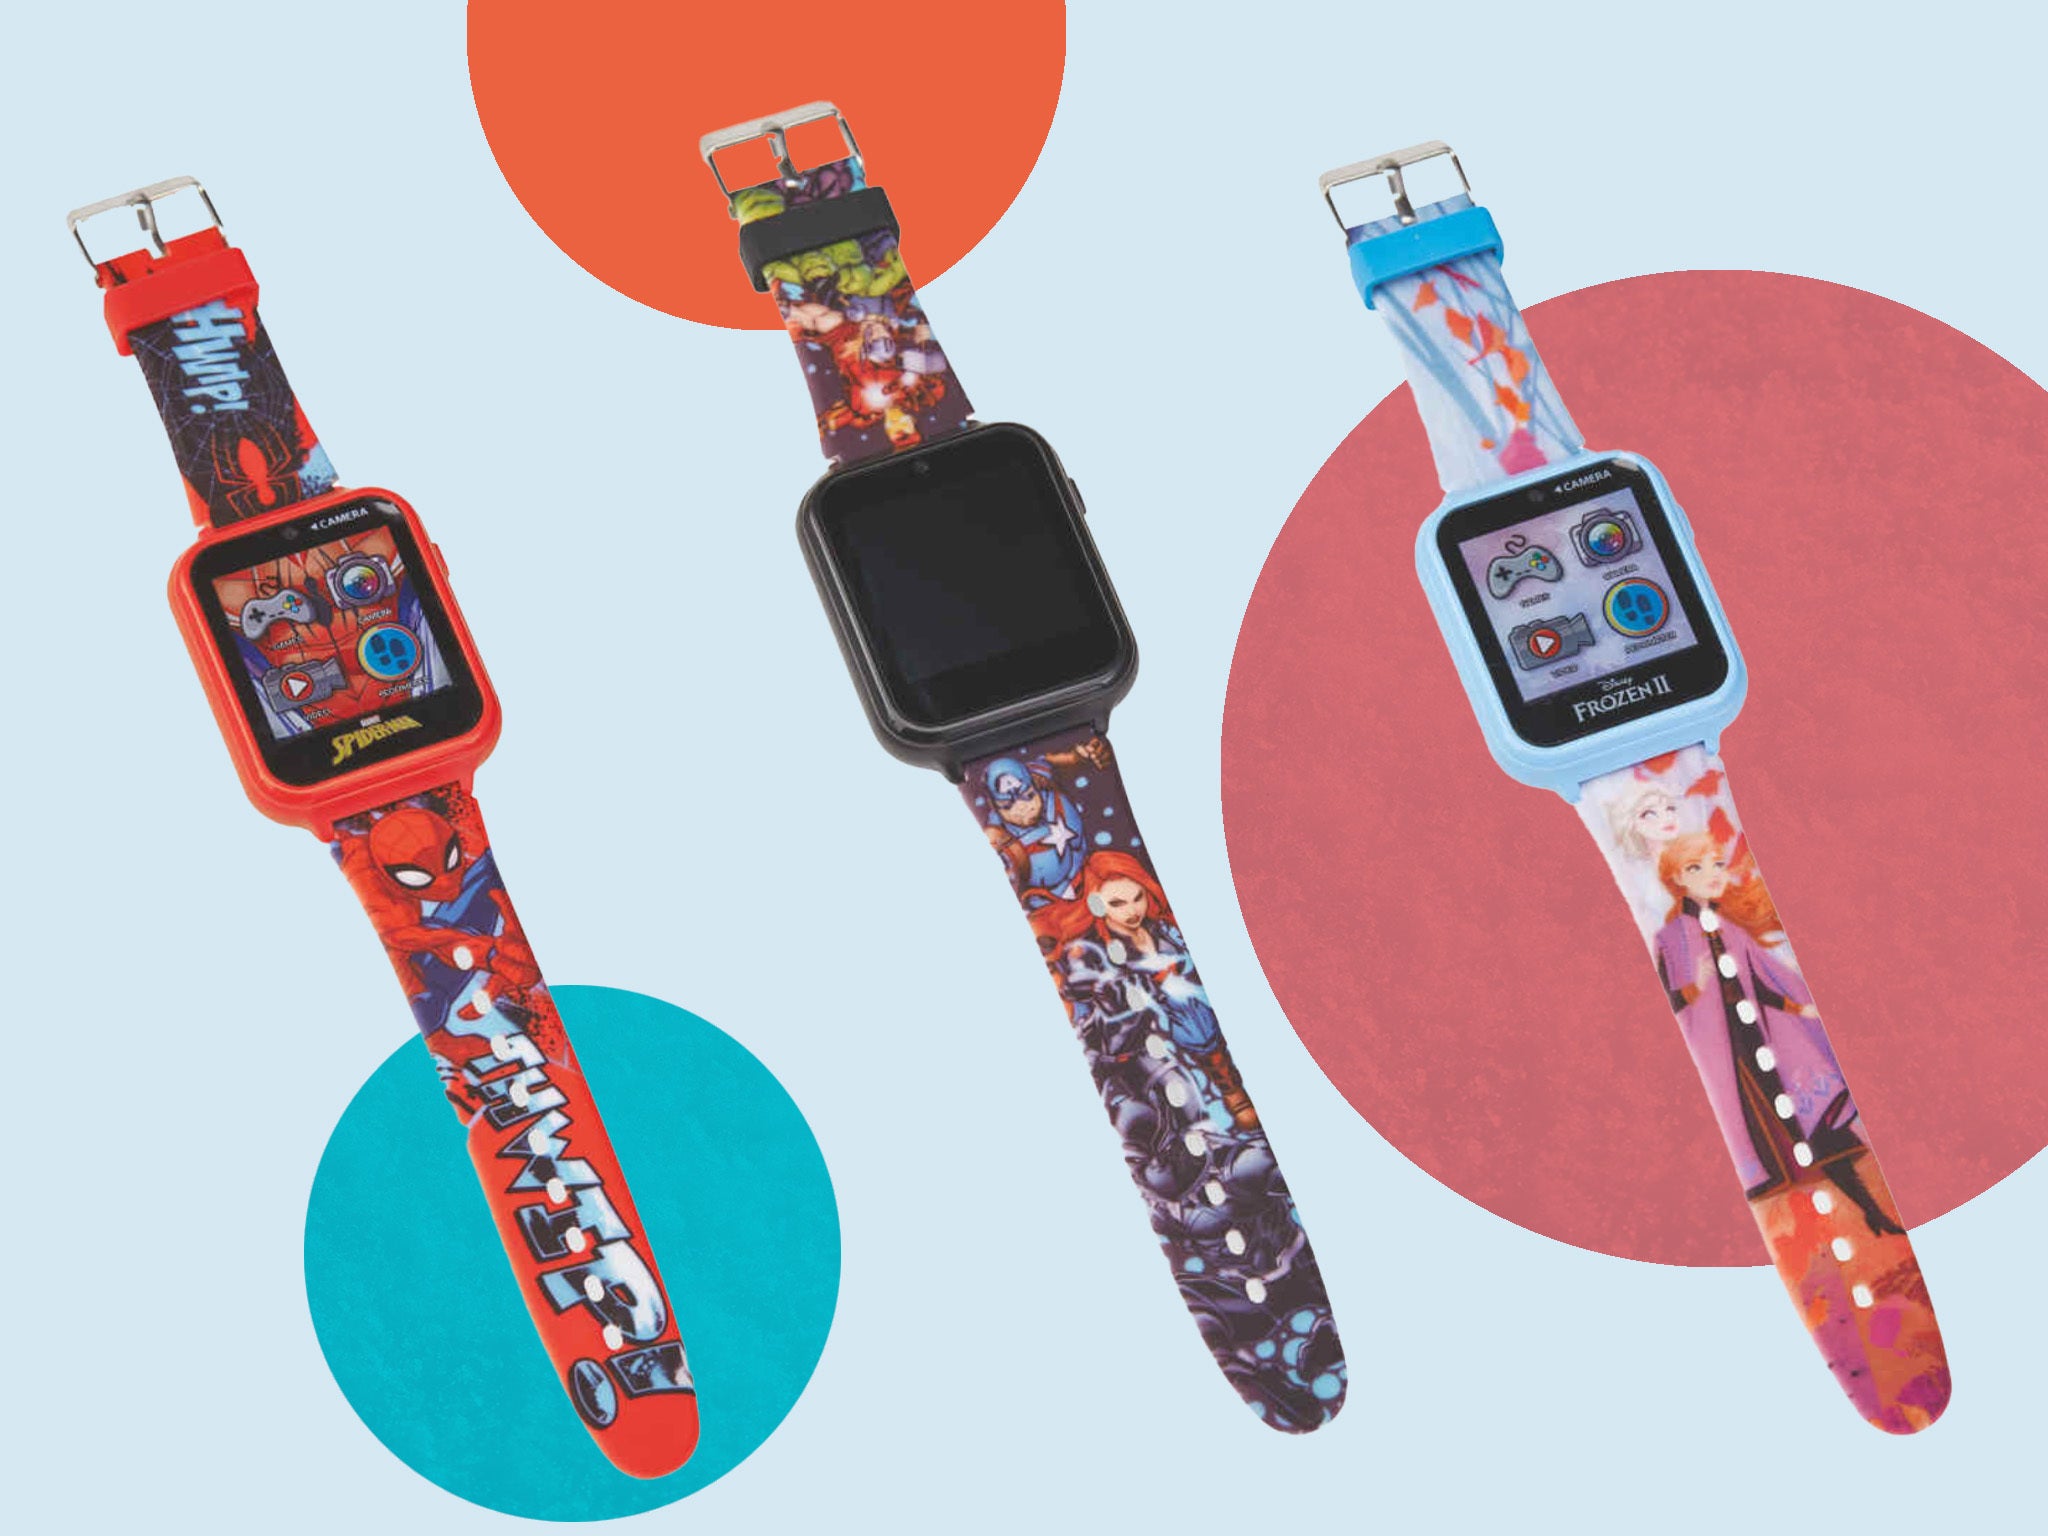 The watches have a built-in camera, recorder, pedometer, alarm clock and games for kids to enjoy